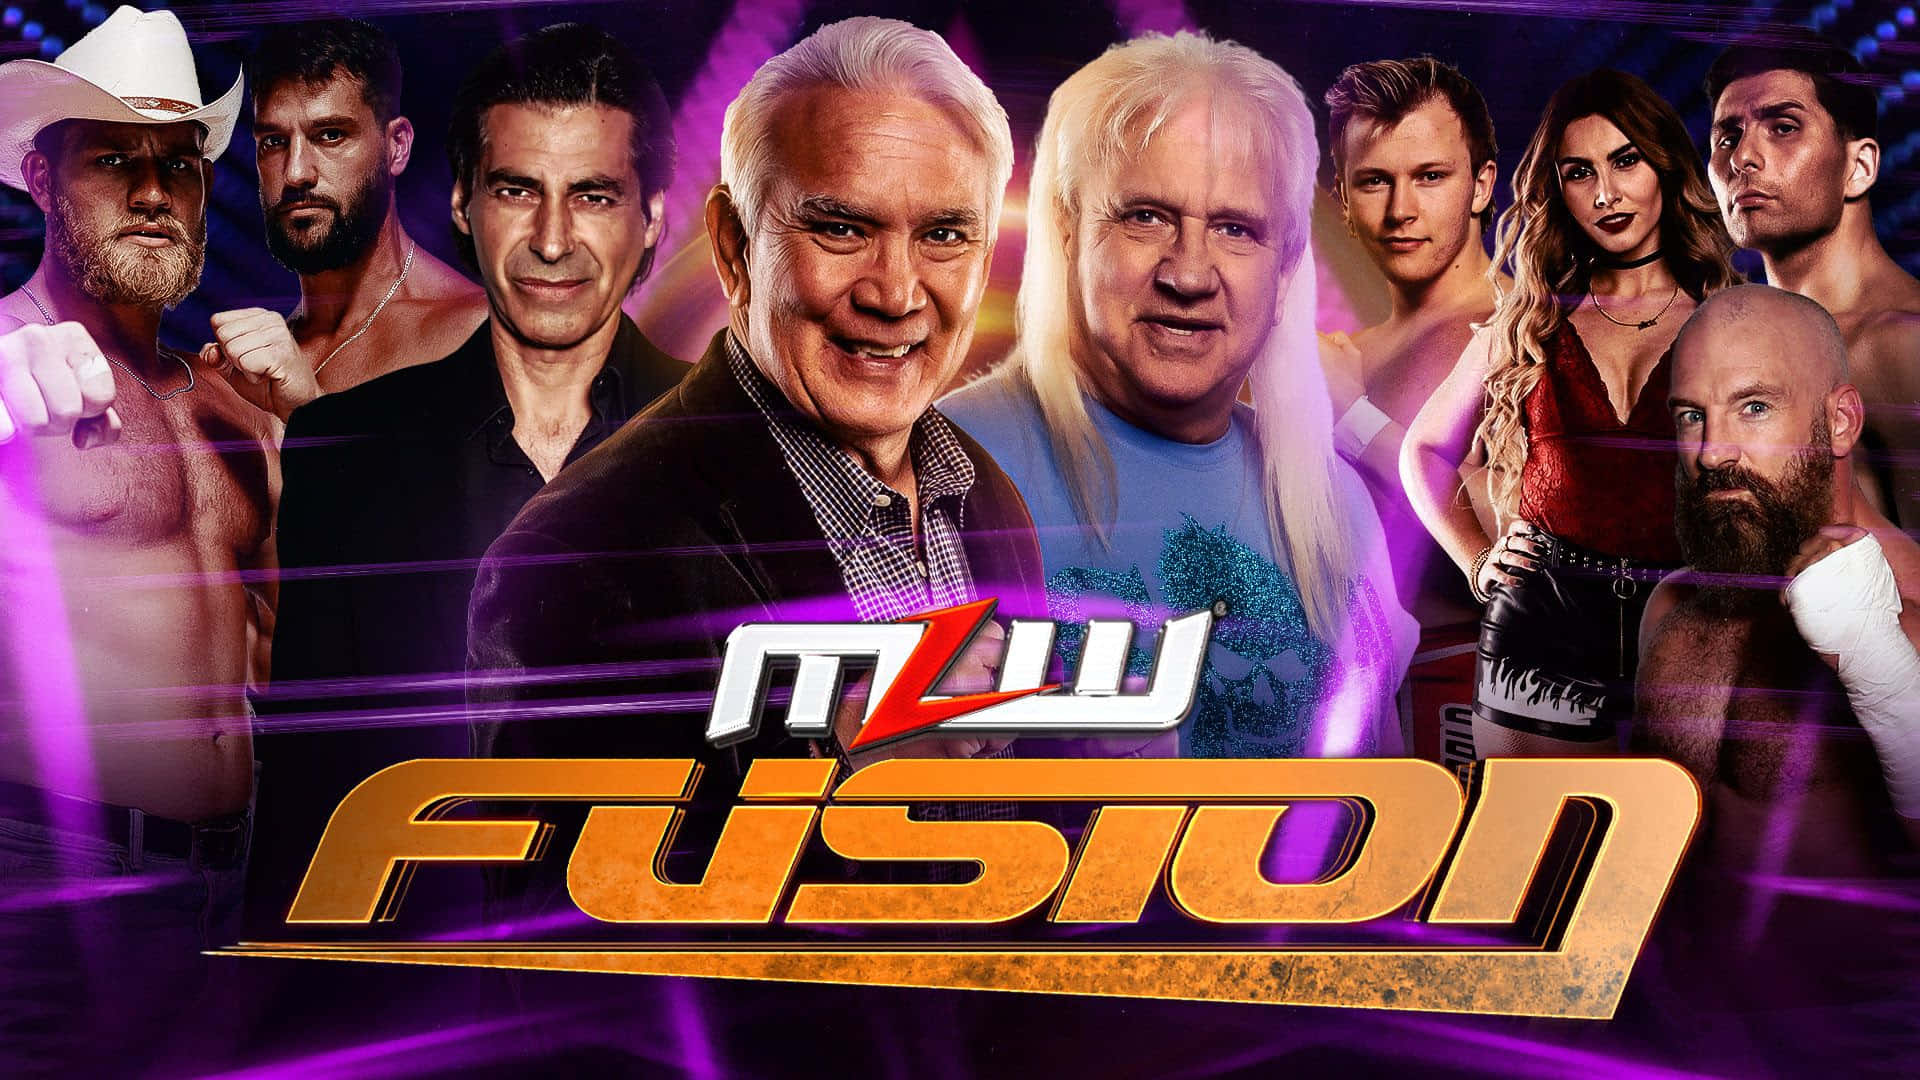 Ricky Steamboat Mlw Fusion Wrestling Promotions Wallpaper